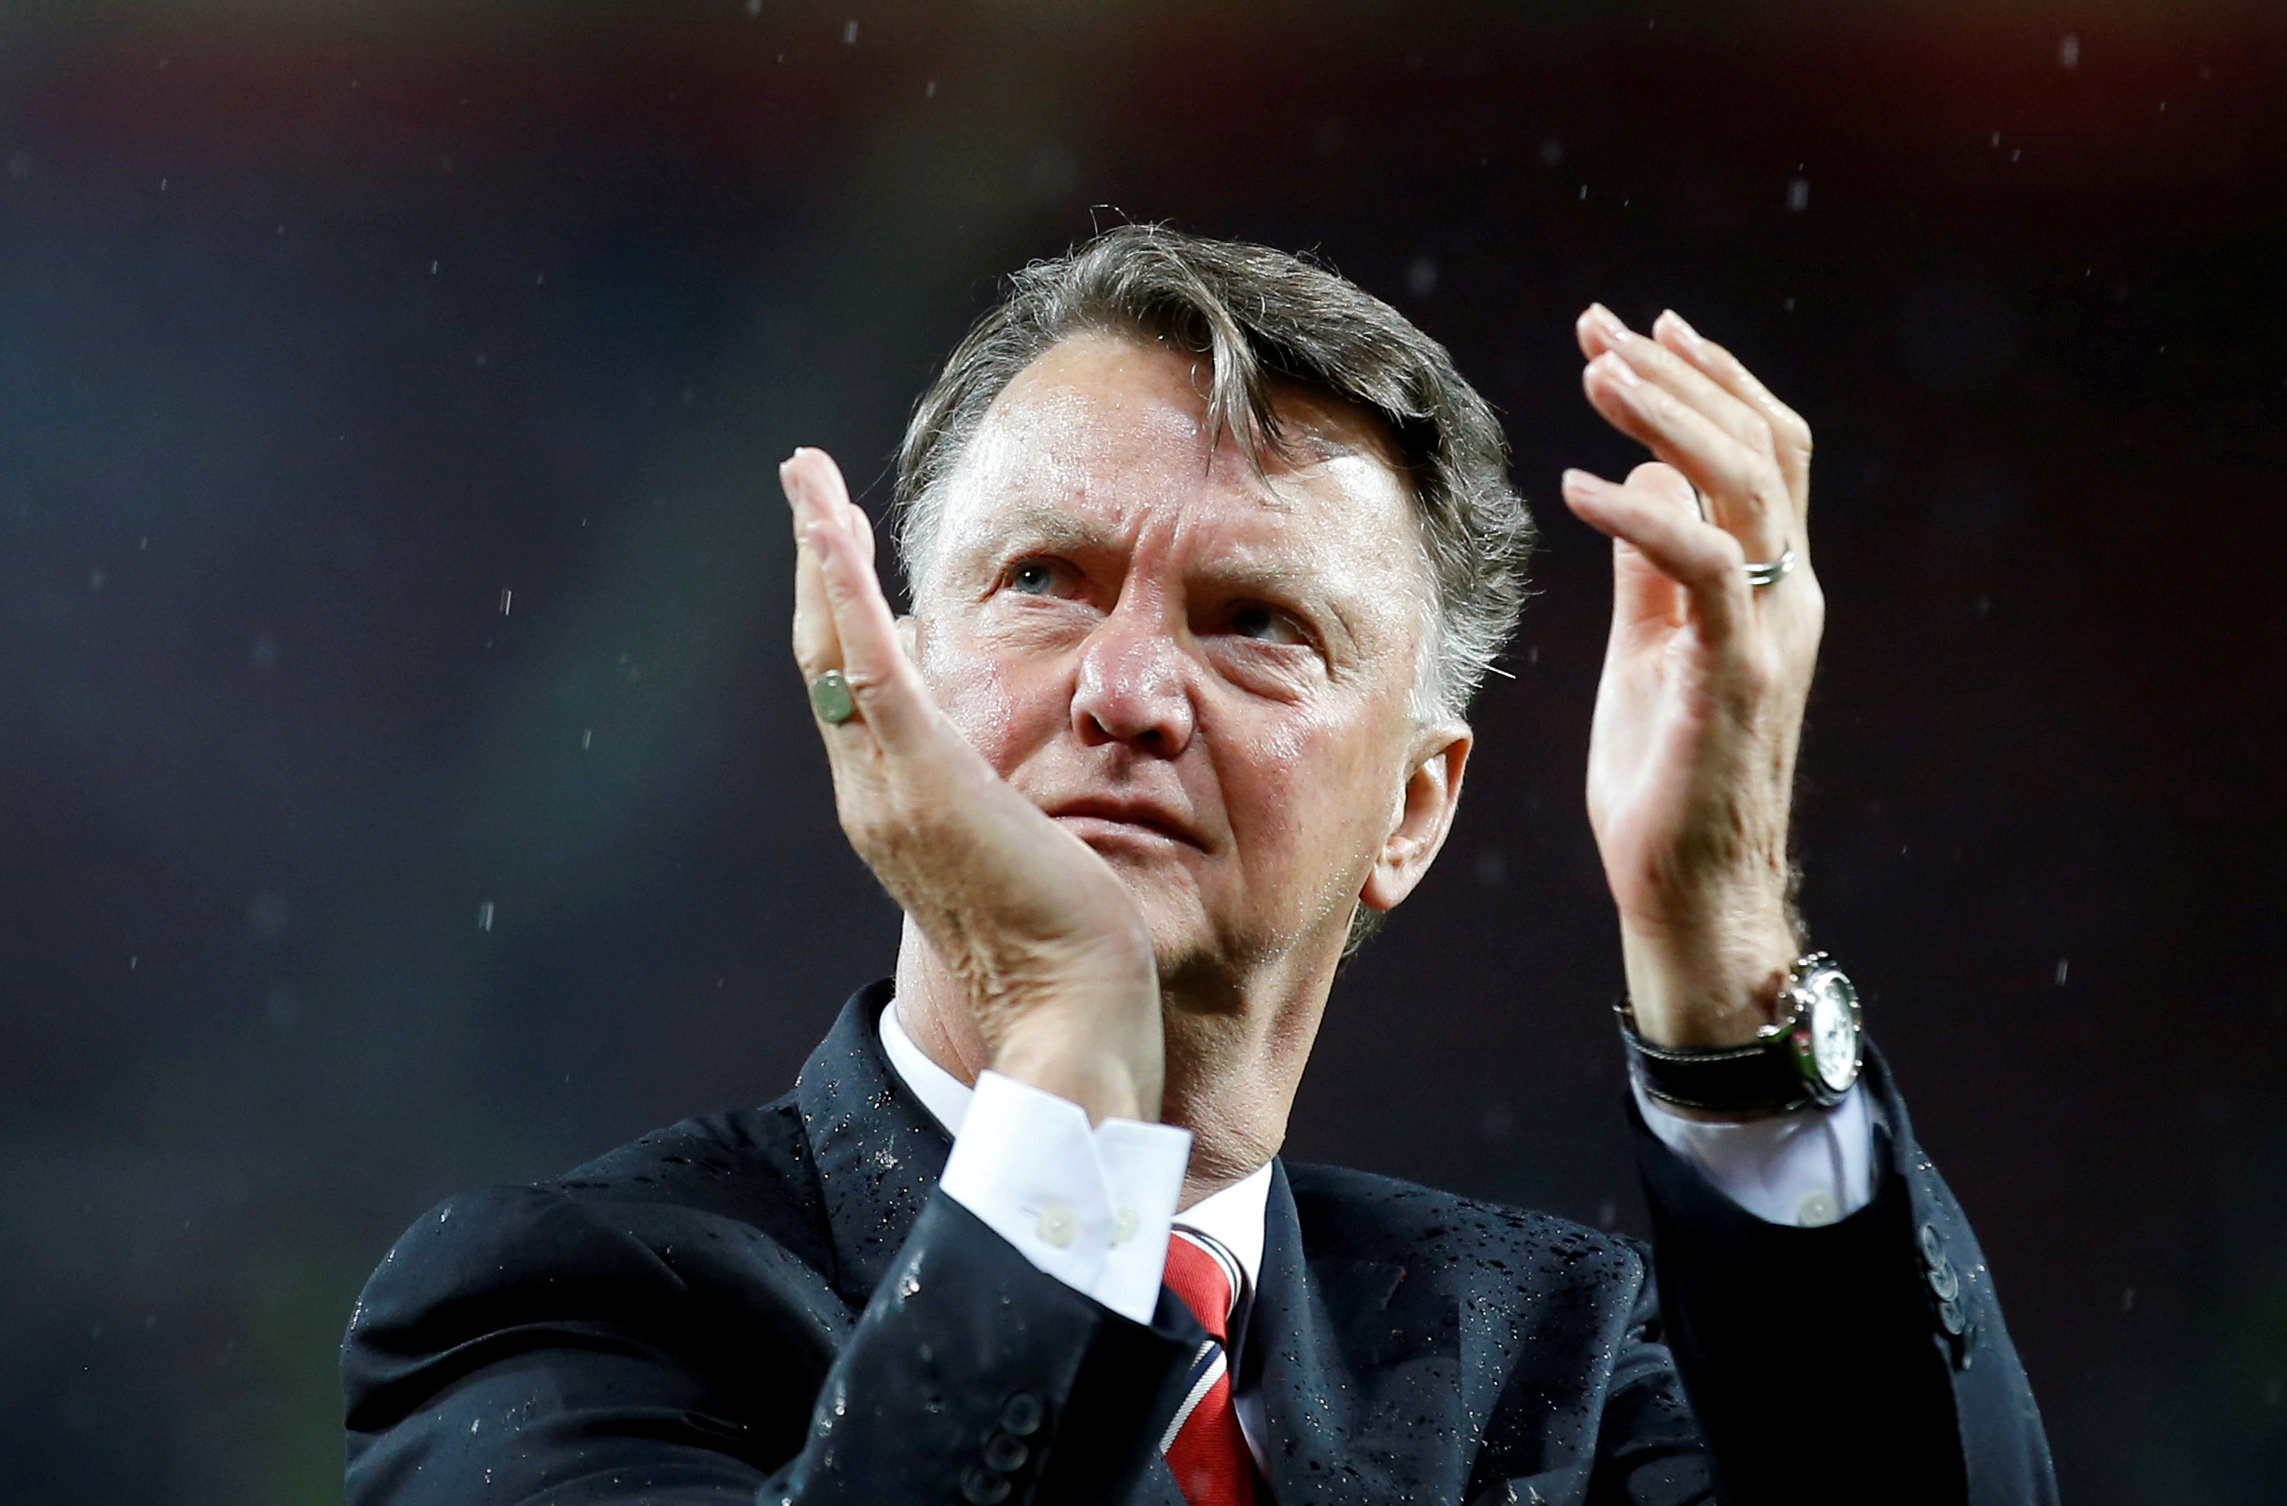 Football: Van Gaal ends coaching career after family tragedy